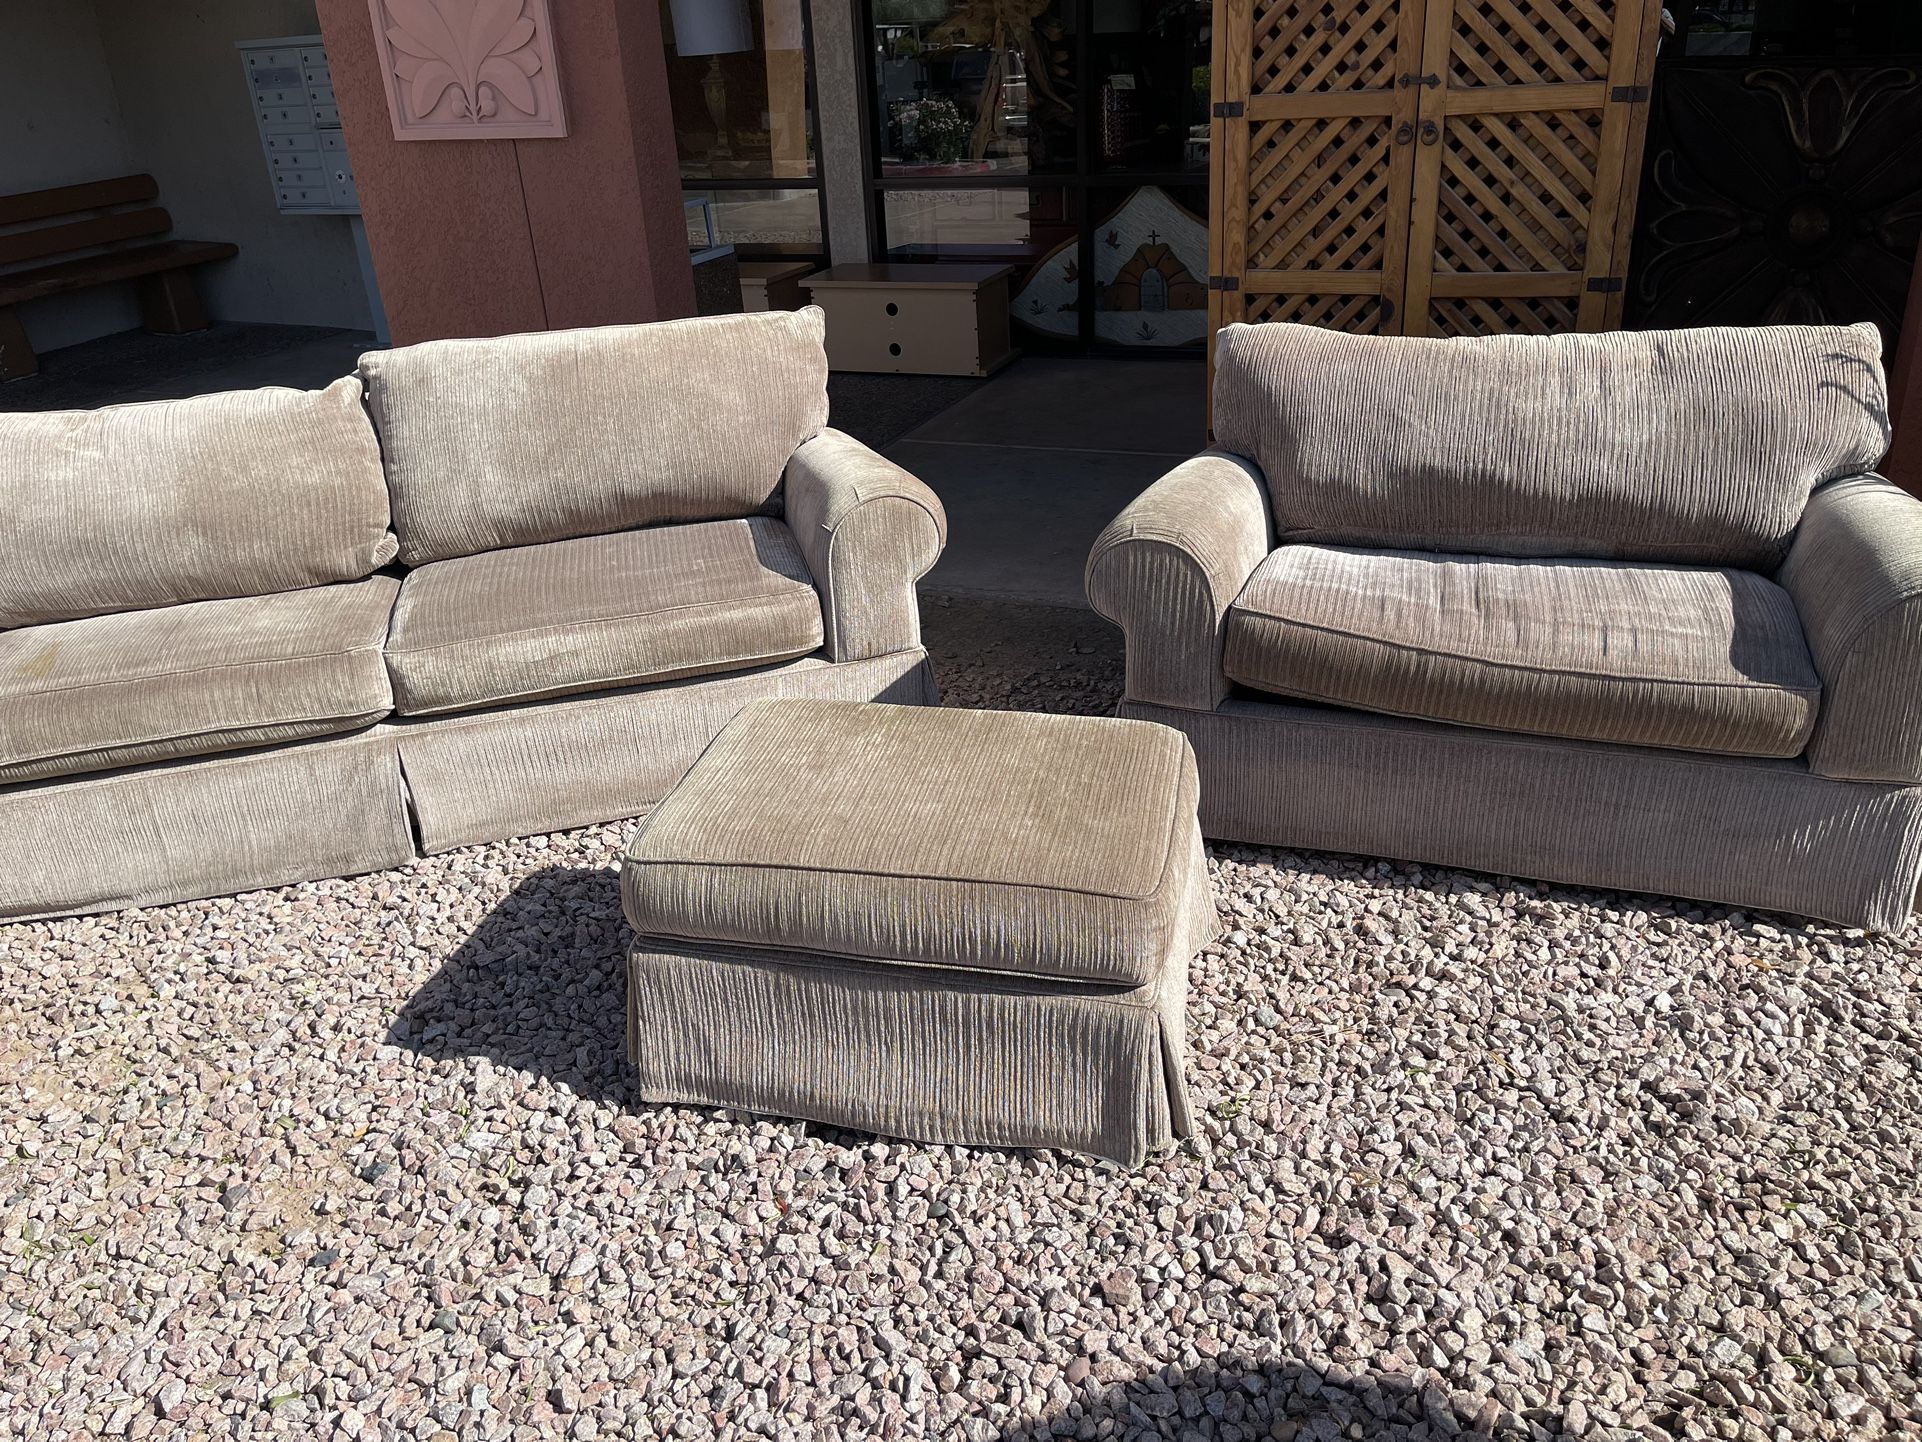 Sofa, Loveseat, Both Pull Out Beds Plus 1 Ottoman